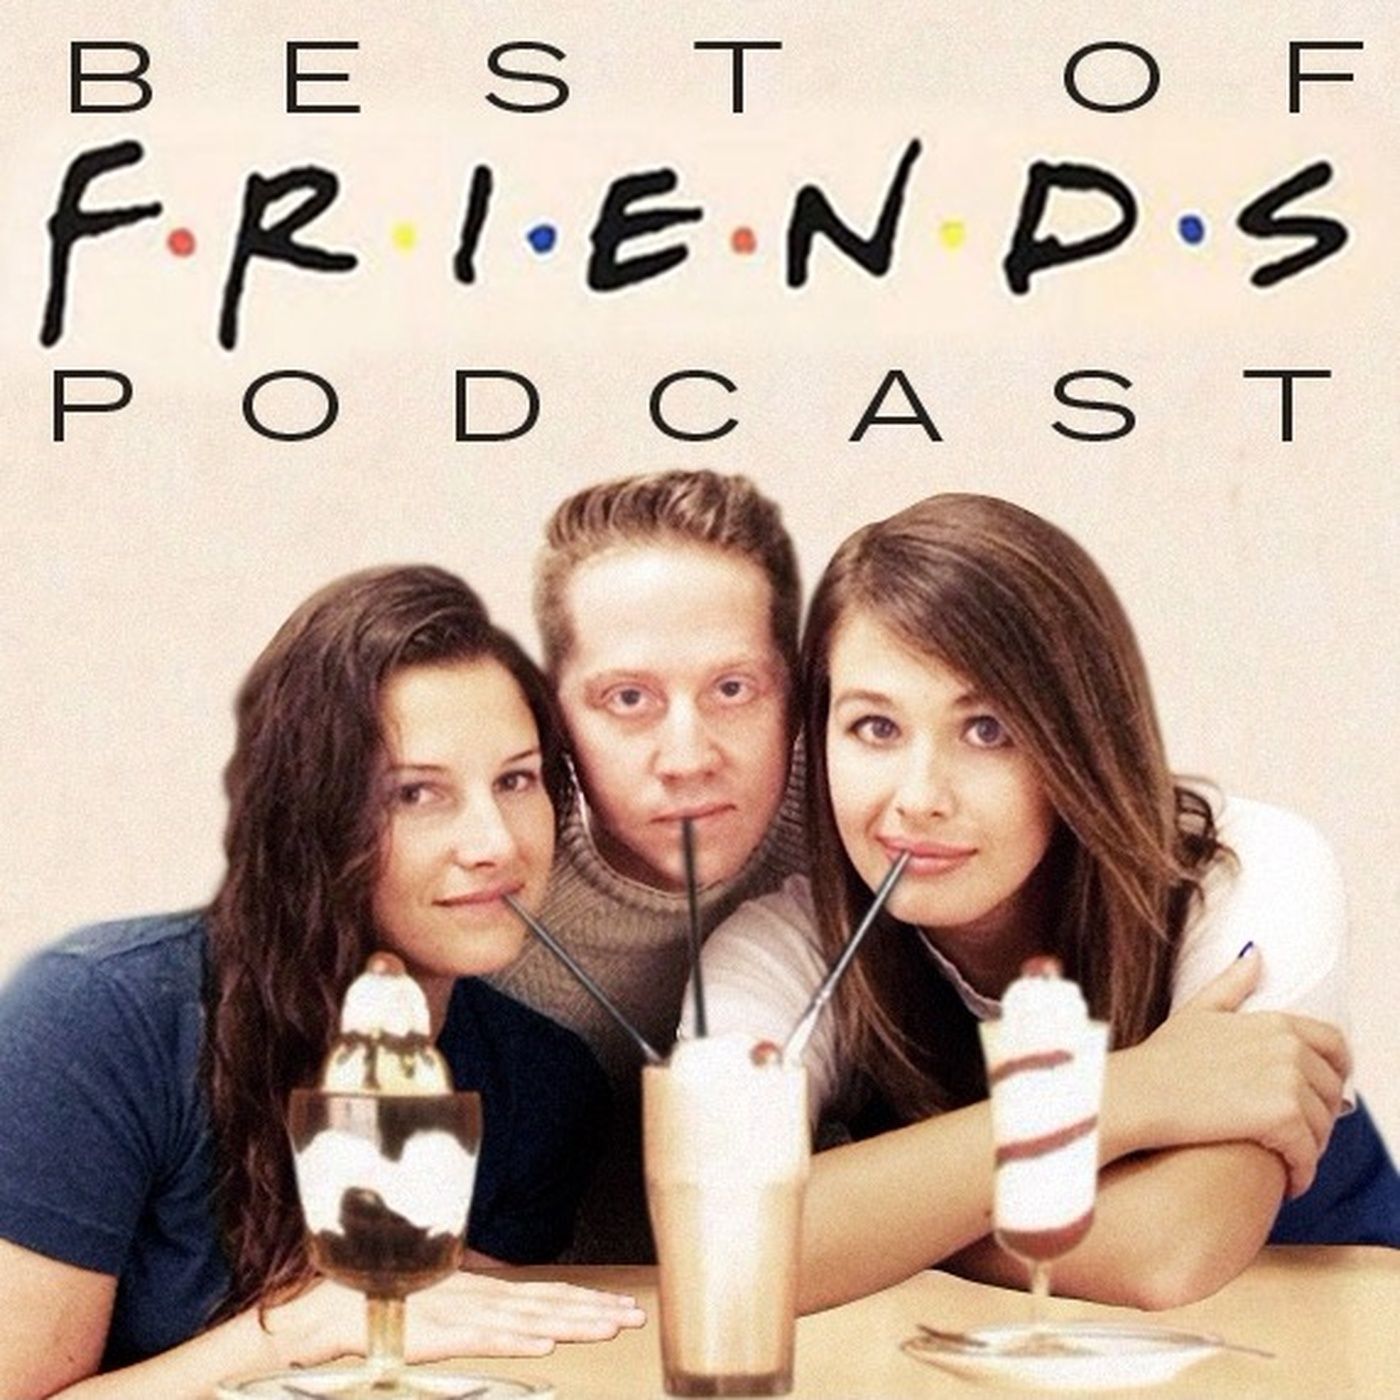 Episode 27: The One With Mr. Heckles